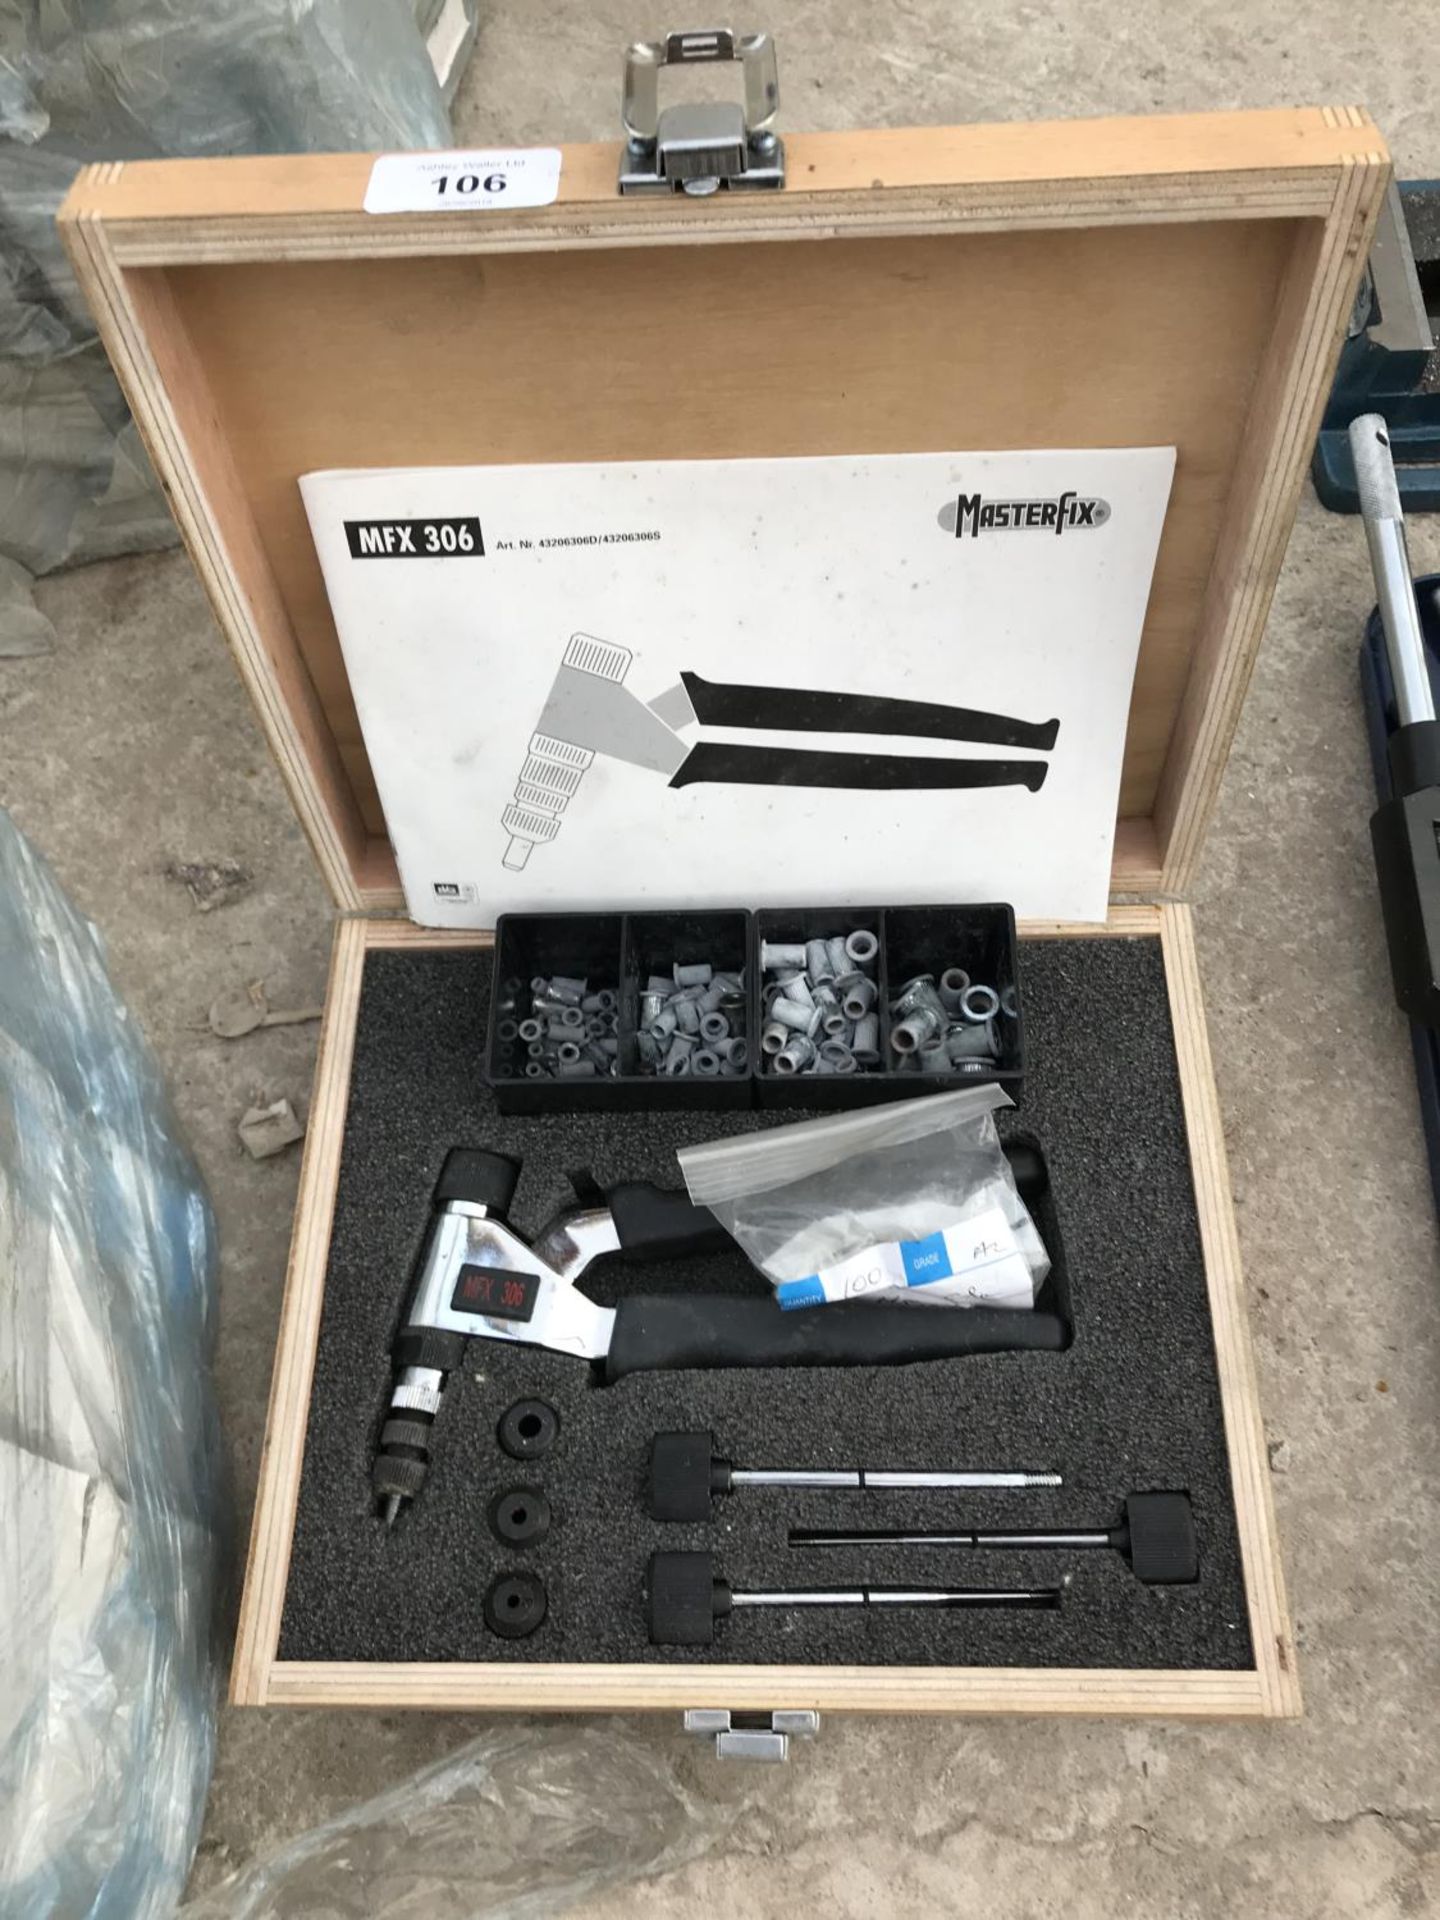 A MASTERFIX BLIND RIVETER - MODEL MFX 306 AS NEW WITH CASE AND INSTRUCTION MANUAL - SOLD IN